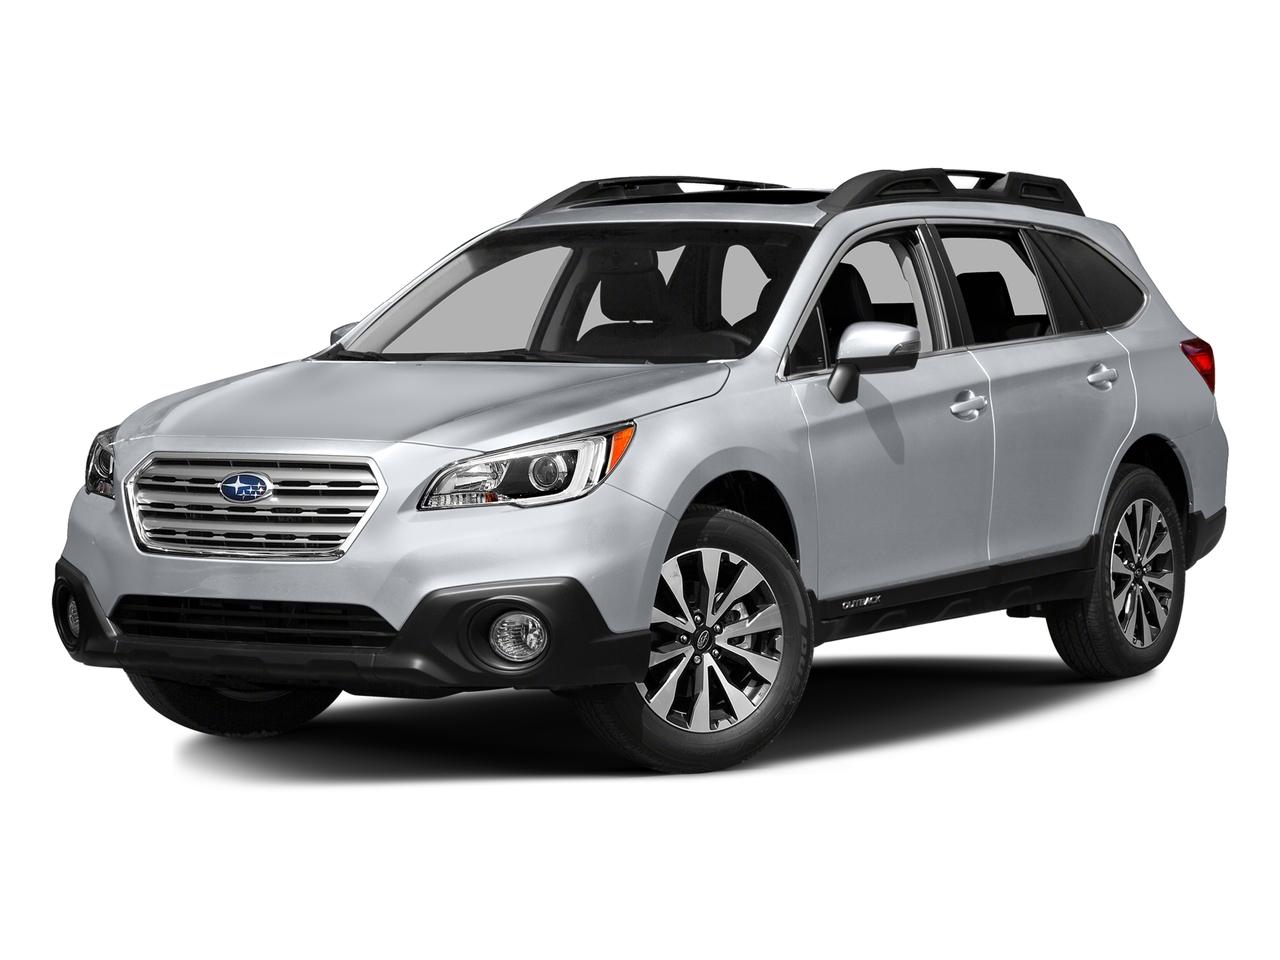 2016 Subaru Outback Vehicle Photo in Stephenville, TX 76401-3713